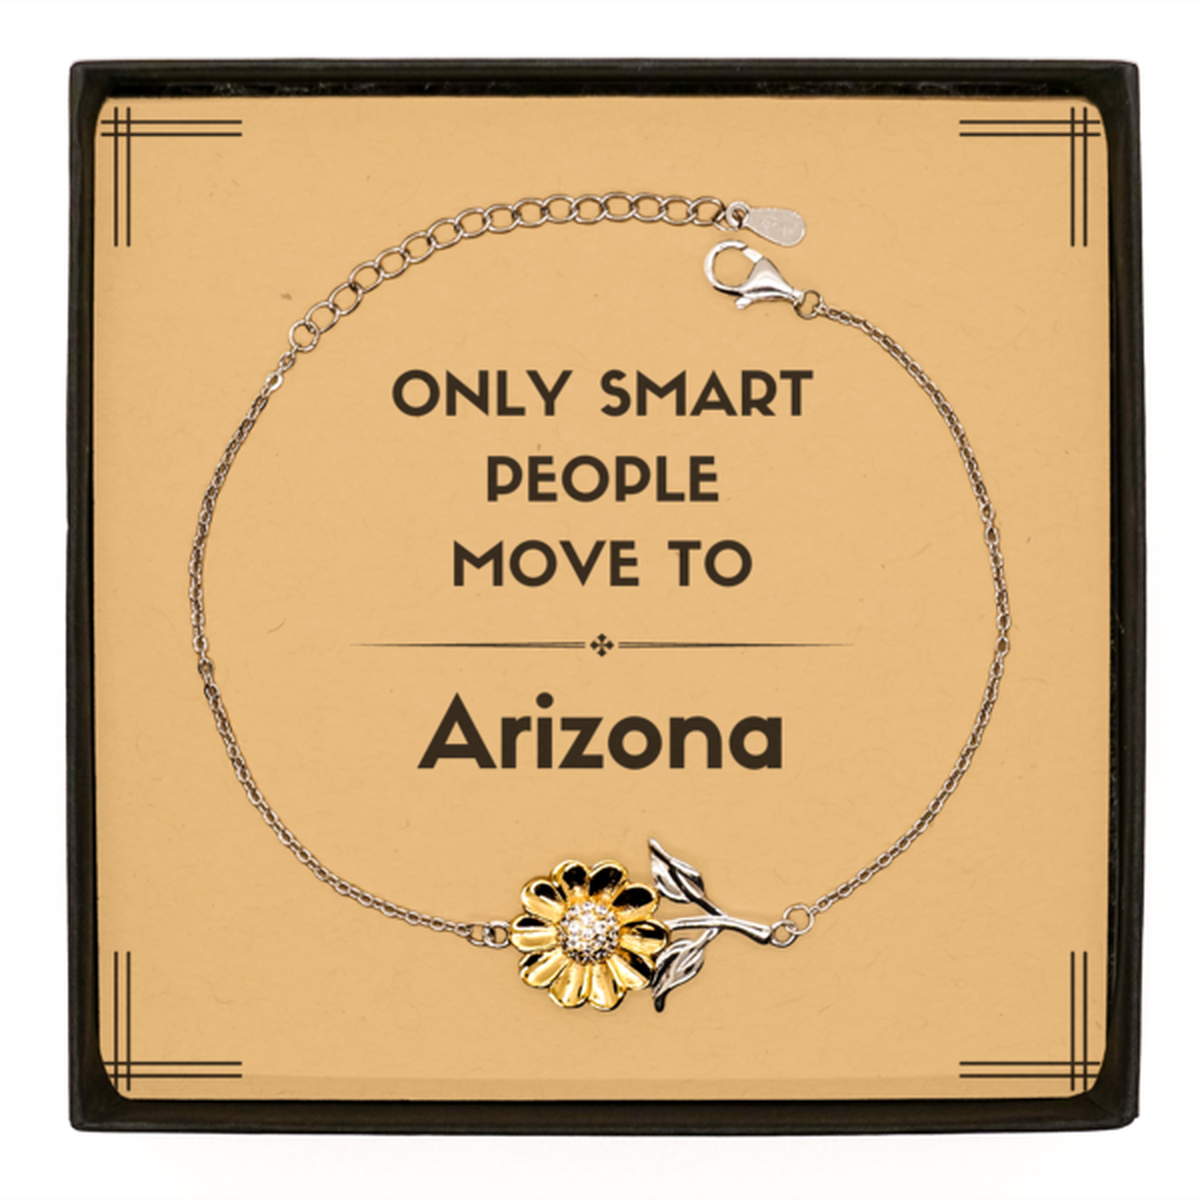 Only smart people move to Arizona Sunflower Bracelet, Message Card Gifts For Arizona, Move to Arizona Gifts for Friends Coworker Funny Saying Quote